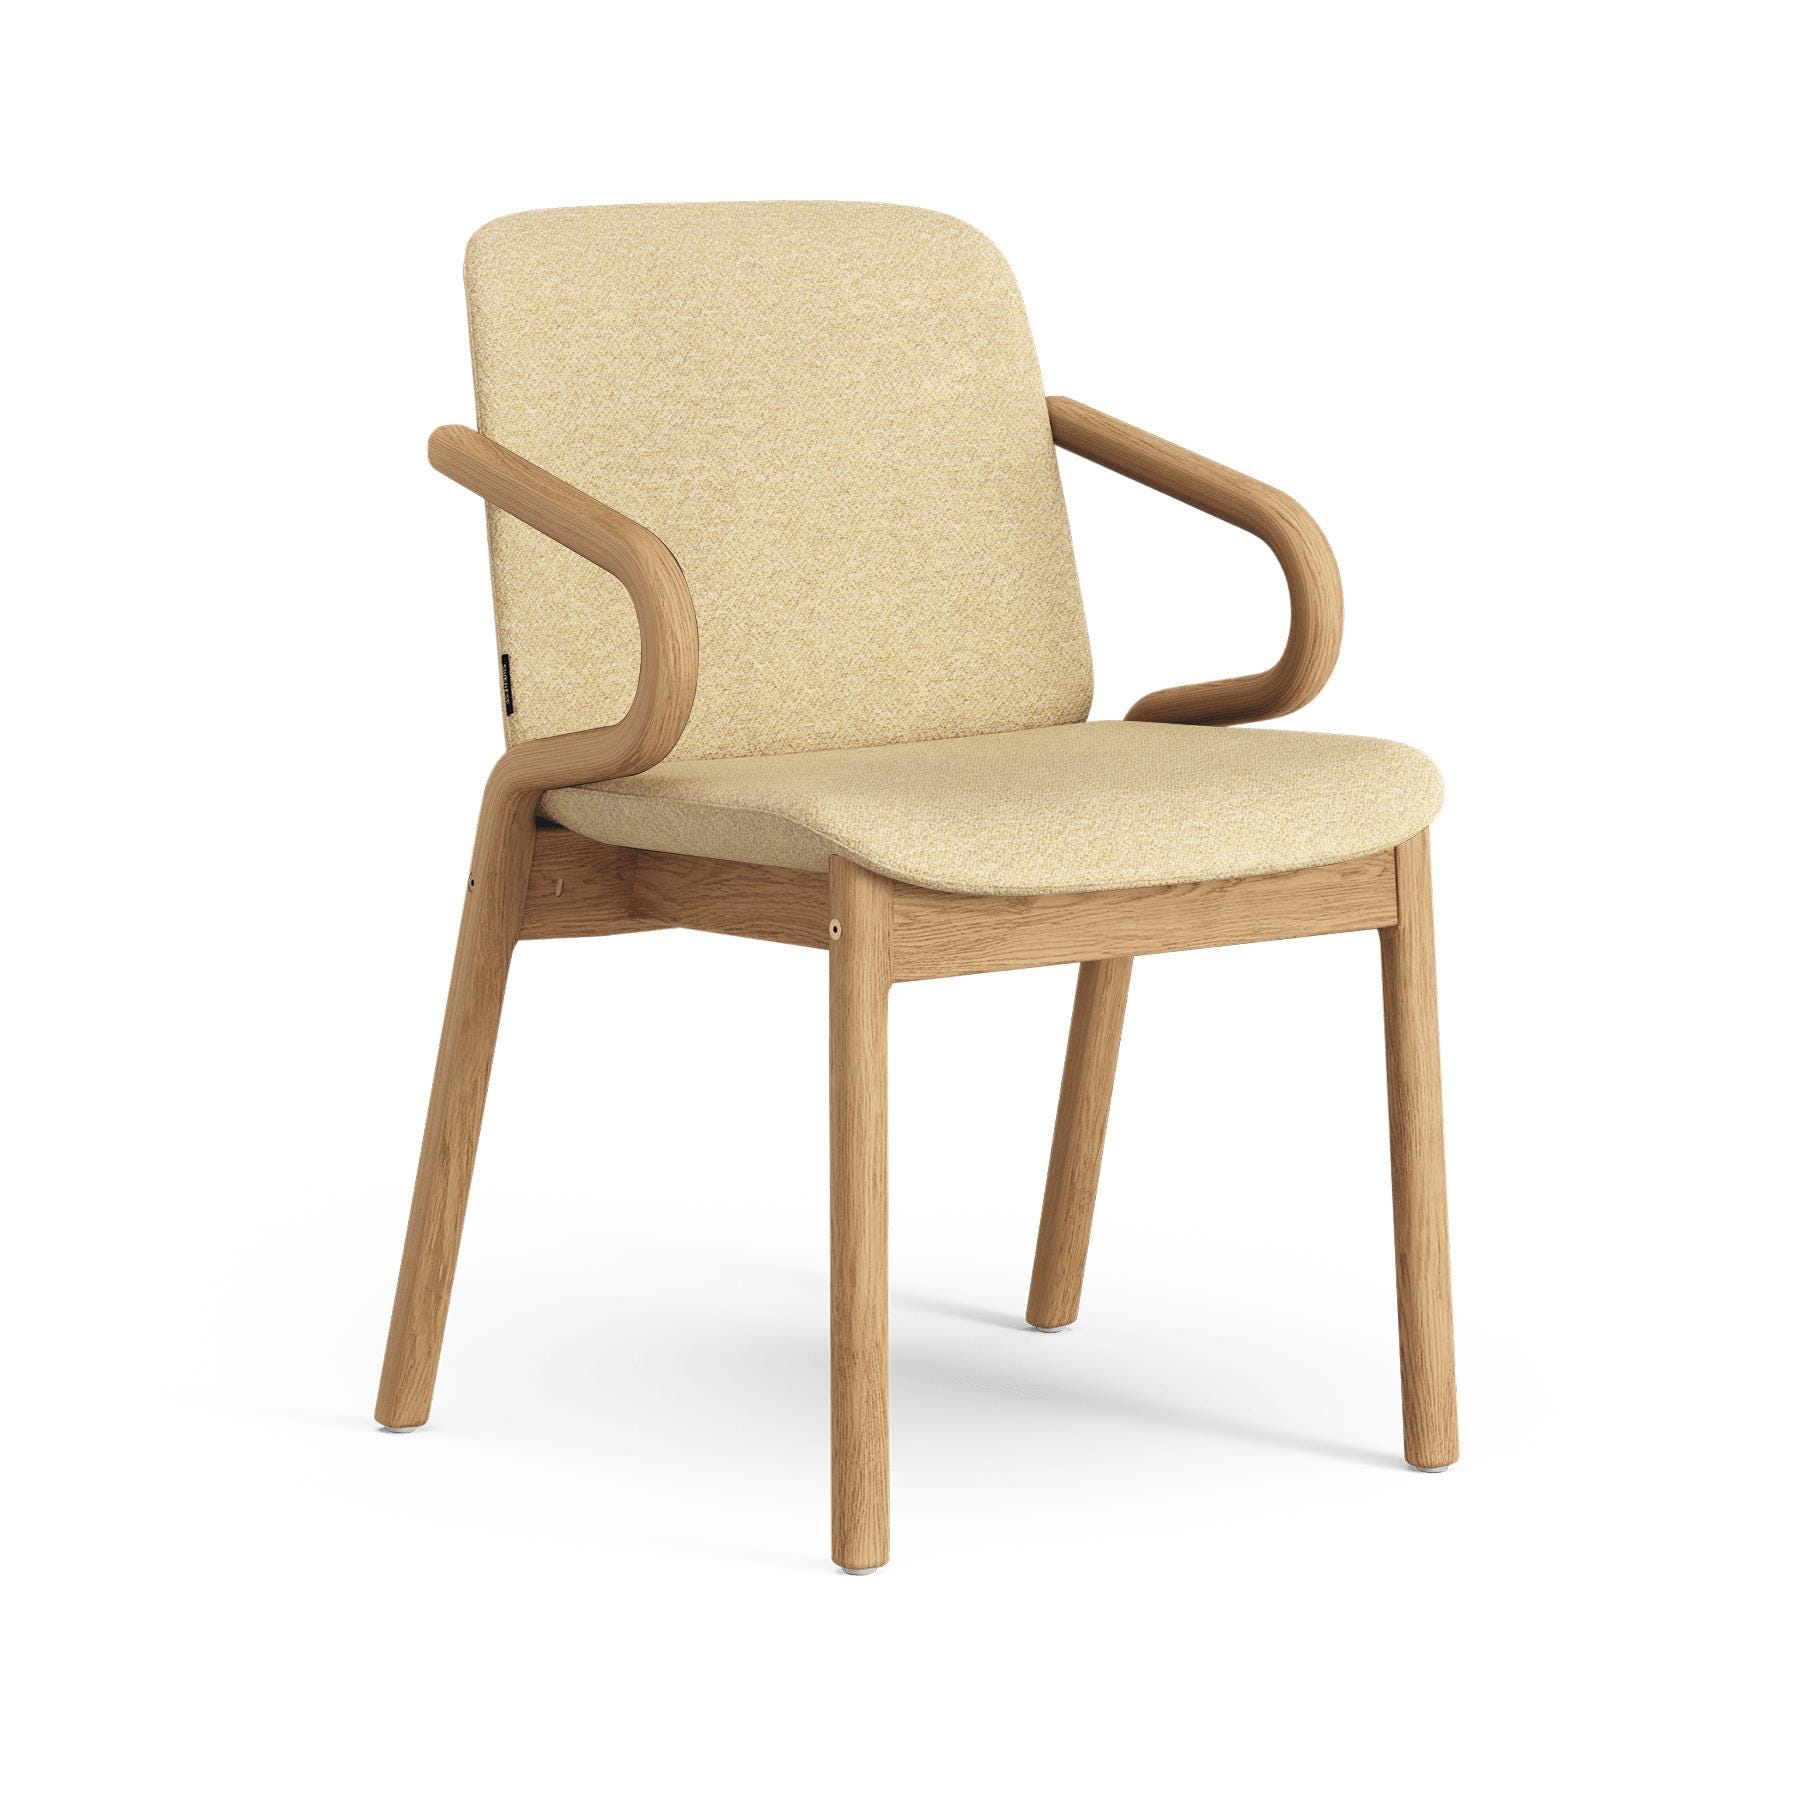 Swedese Amstelle Armchair Oiled Oak Ecriture 0410 Cream Designer Furniture From Holloways Of Ludlow